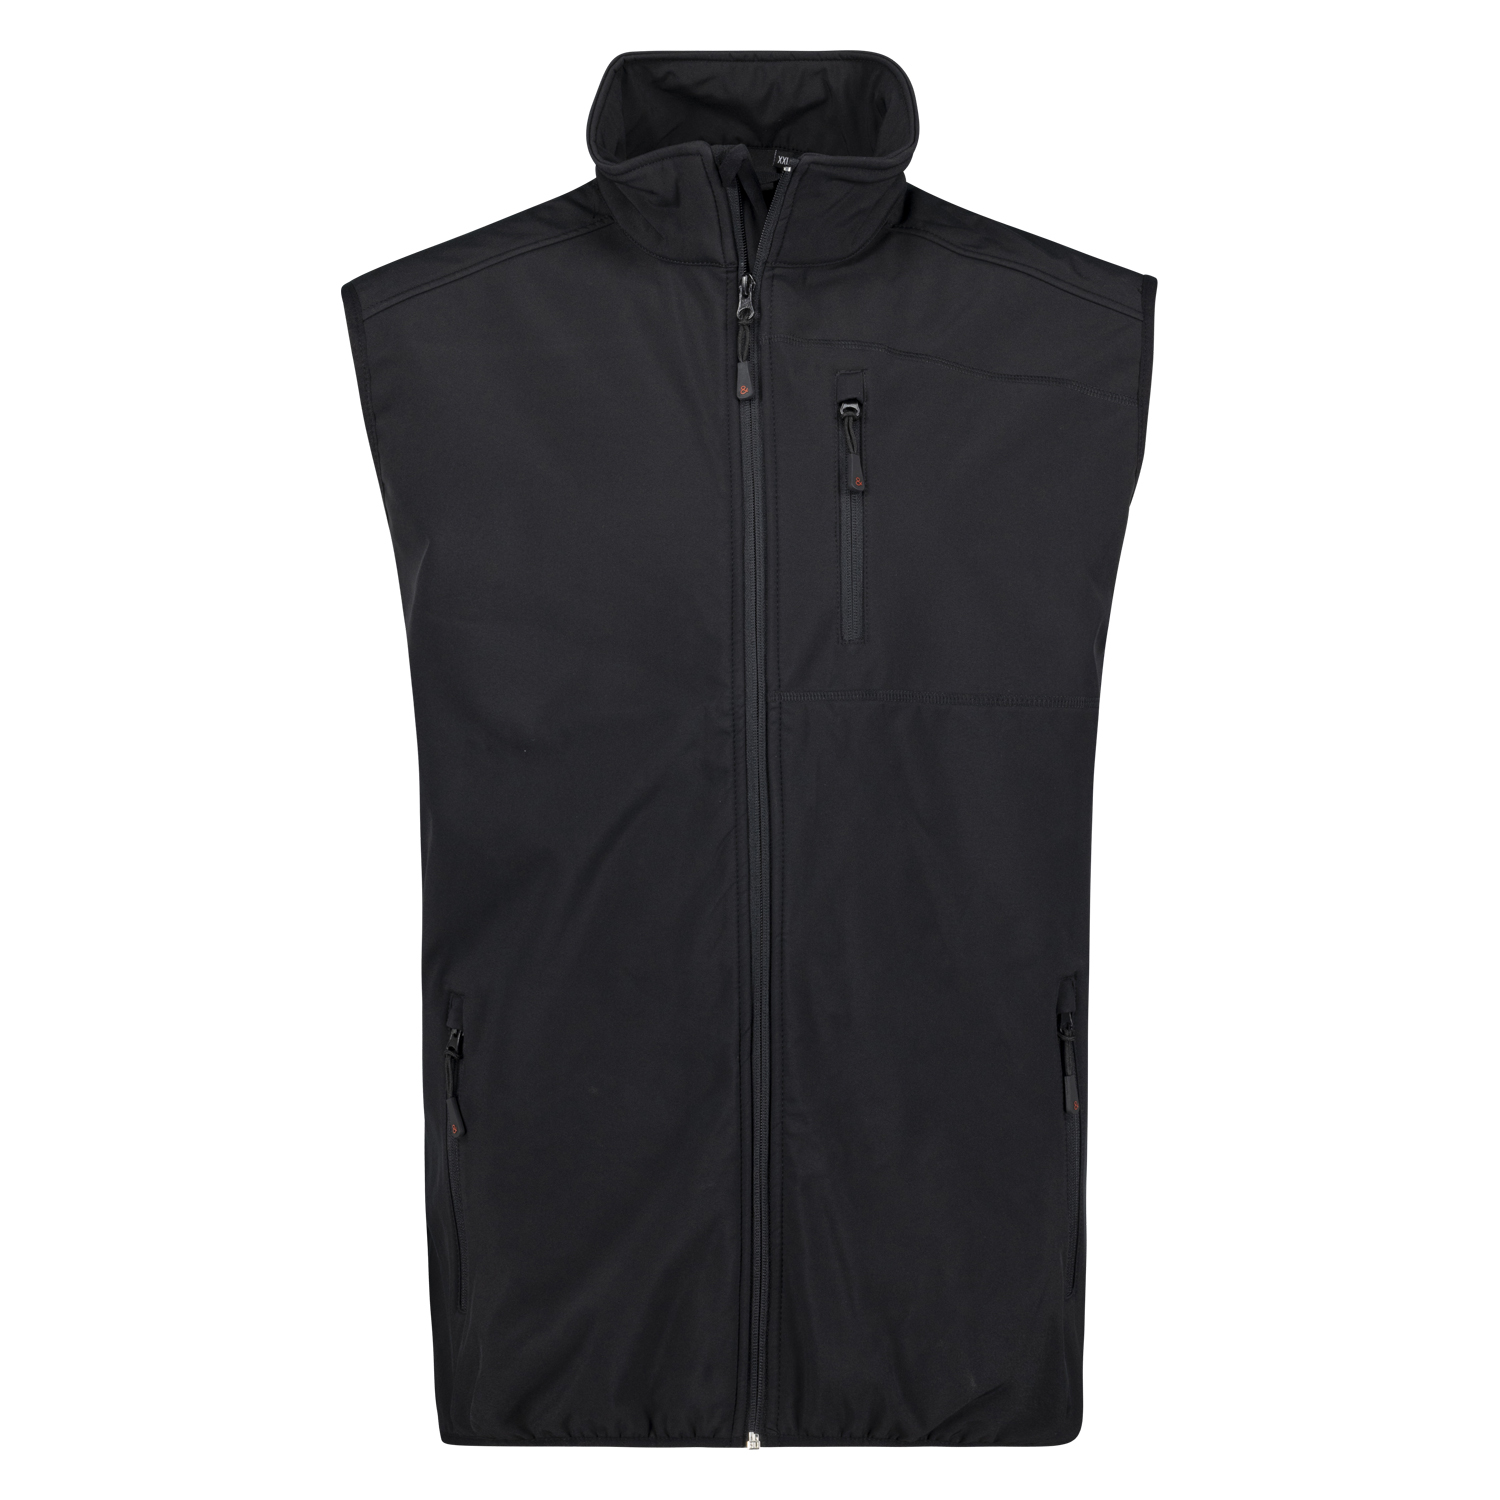 Softshell vest in black by marc&mark in plus sizes up to 10XL